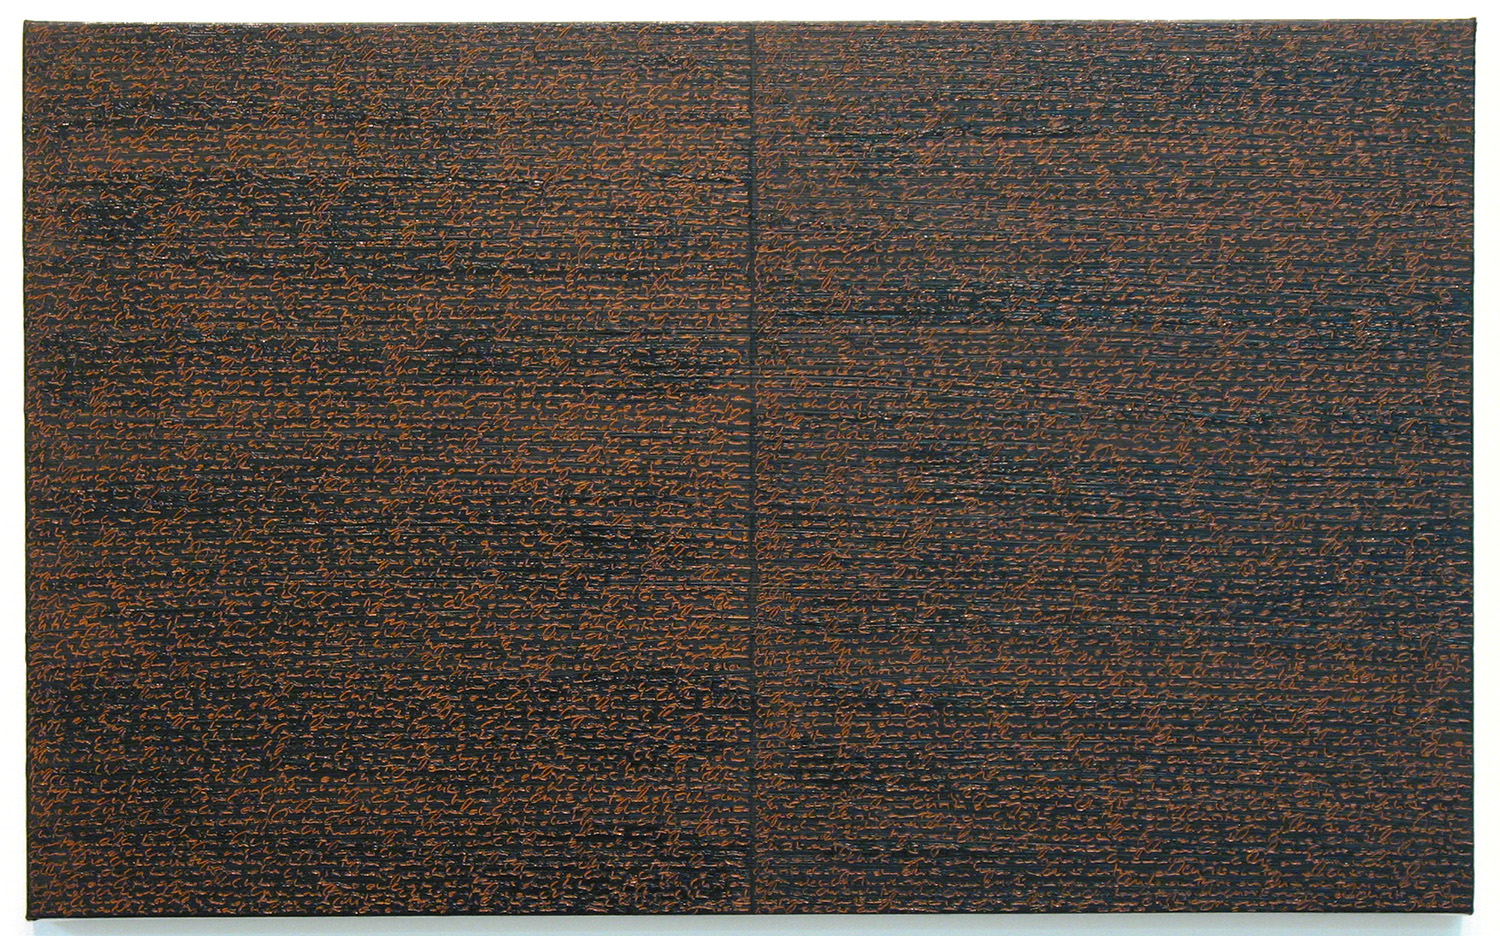 Open Book -orange-brown dark-<br>oil and amber on canvas over panel, 37 x 60 cm, 2008